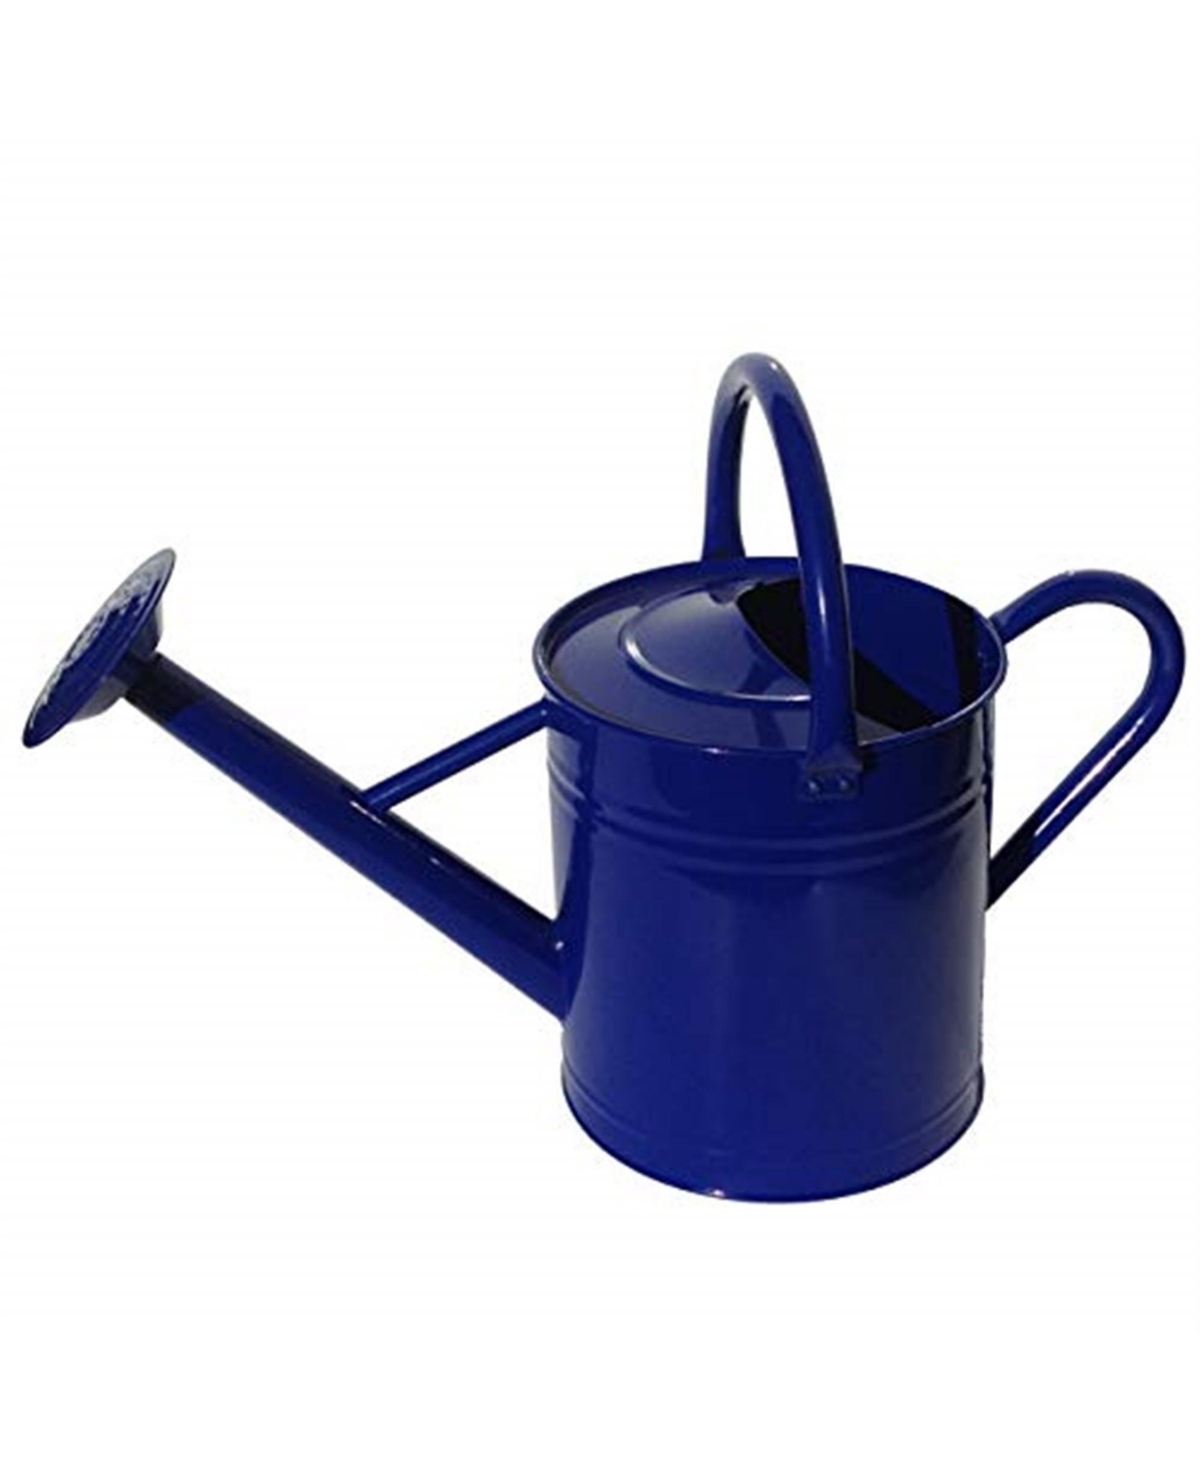 Gardener Select Metal Watering Can, Blue, 1.85 Gallons 7L - Blue